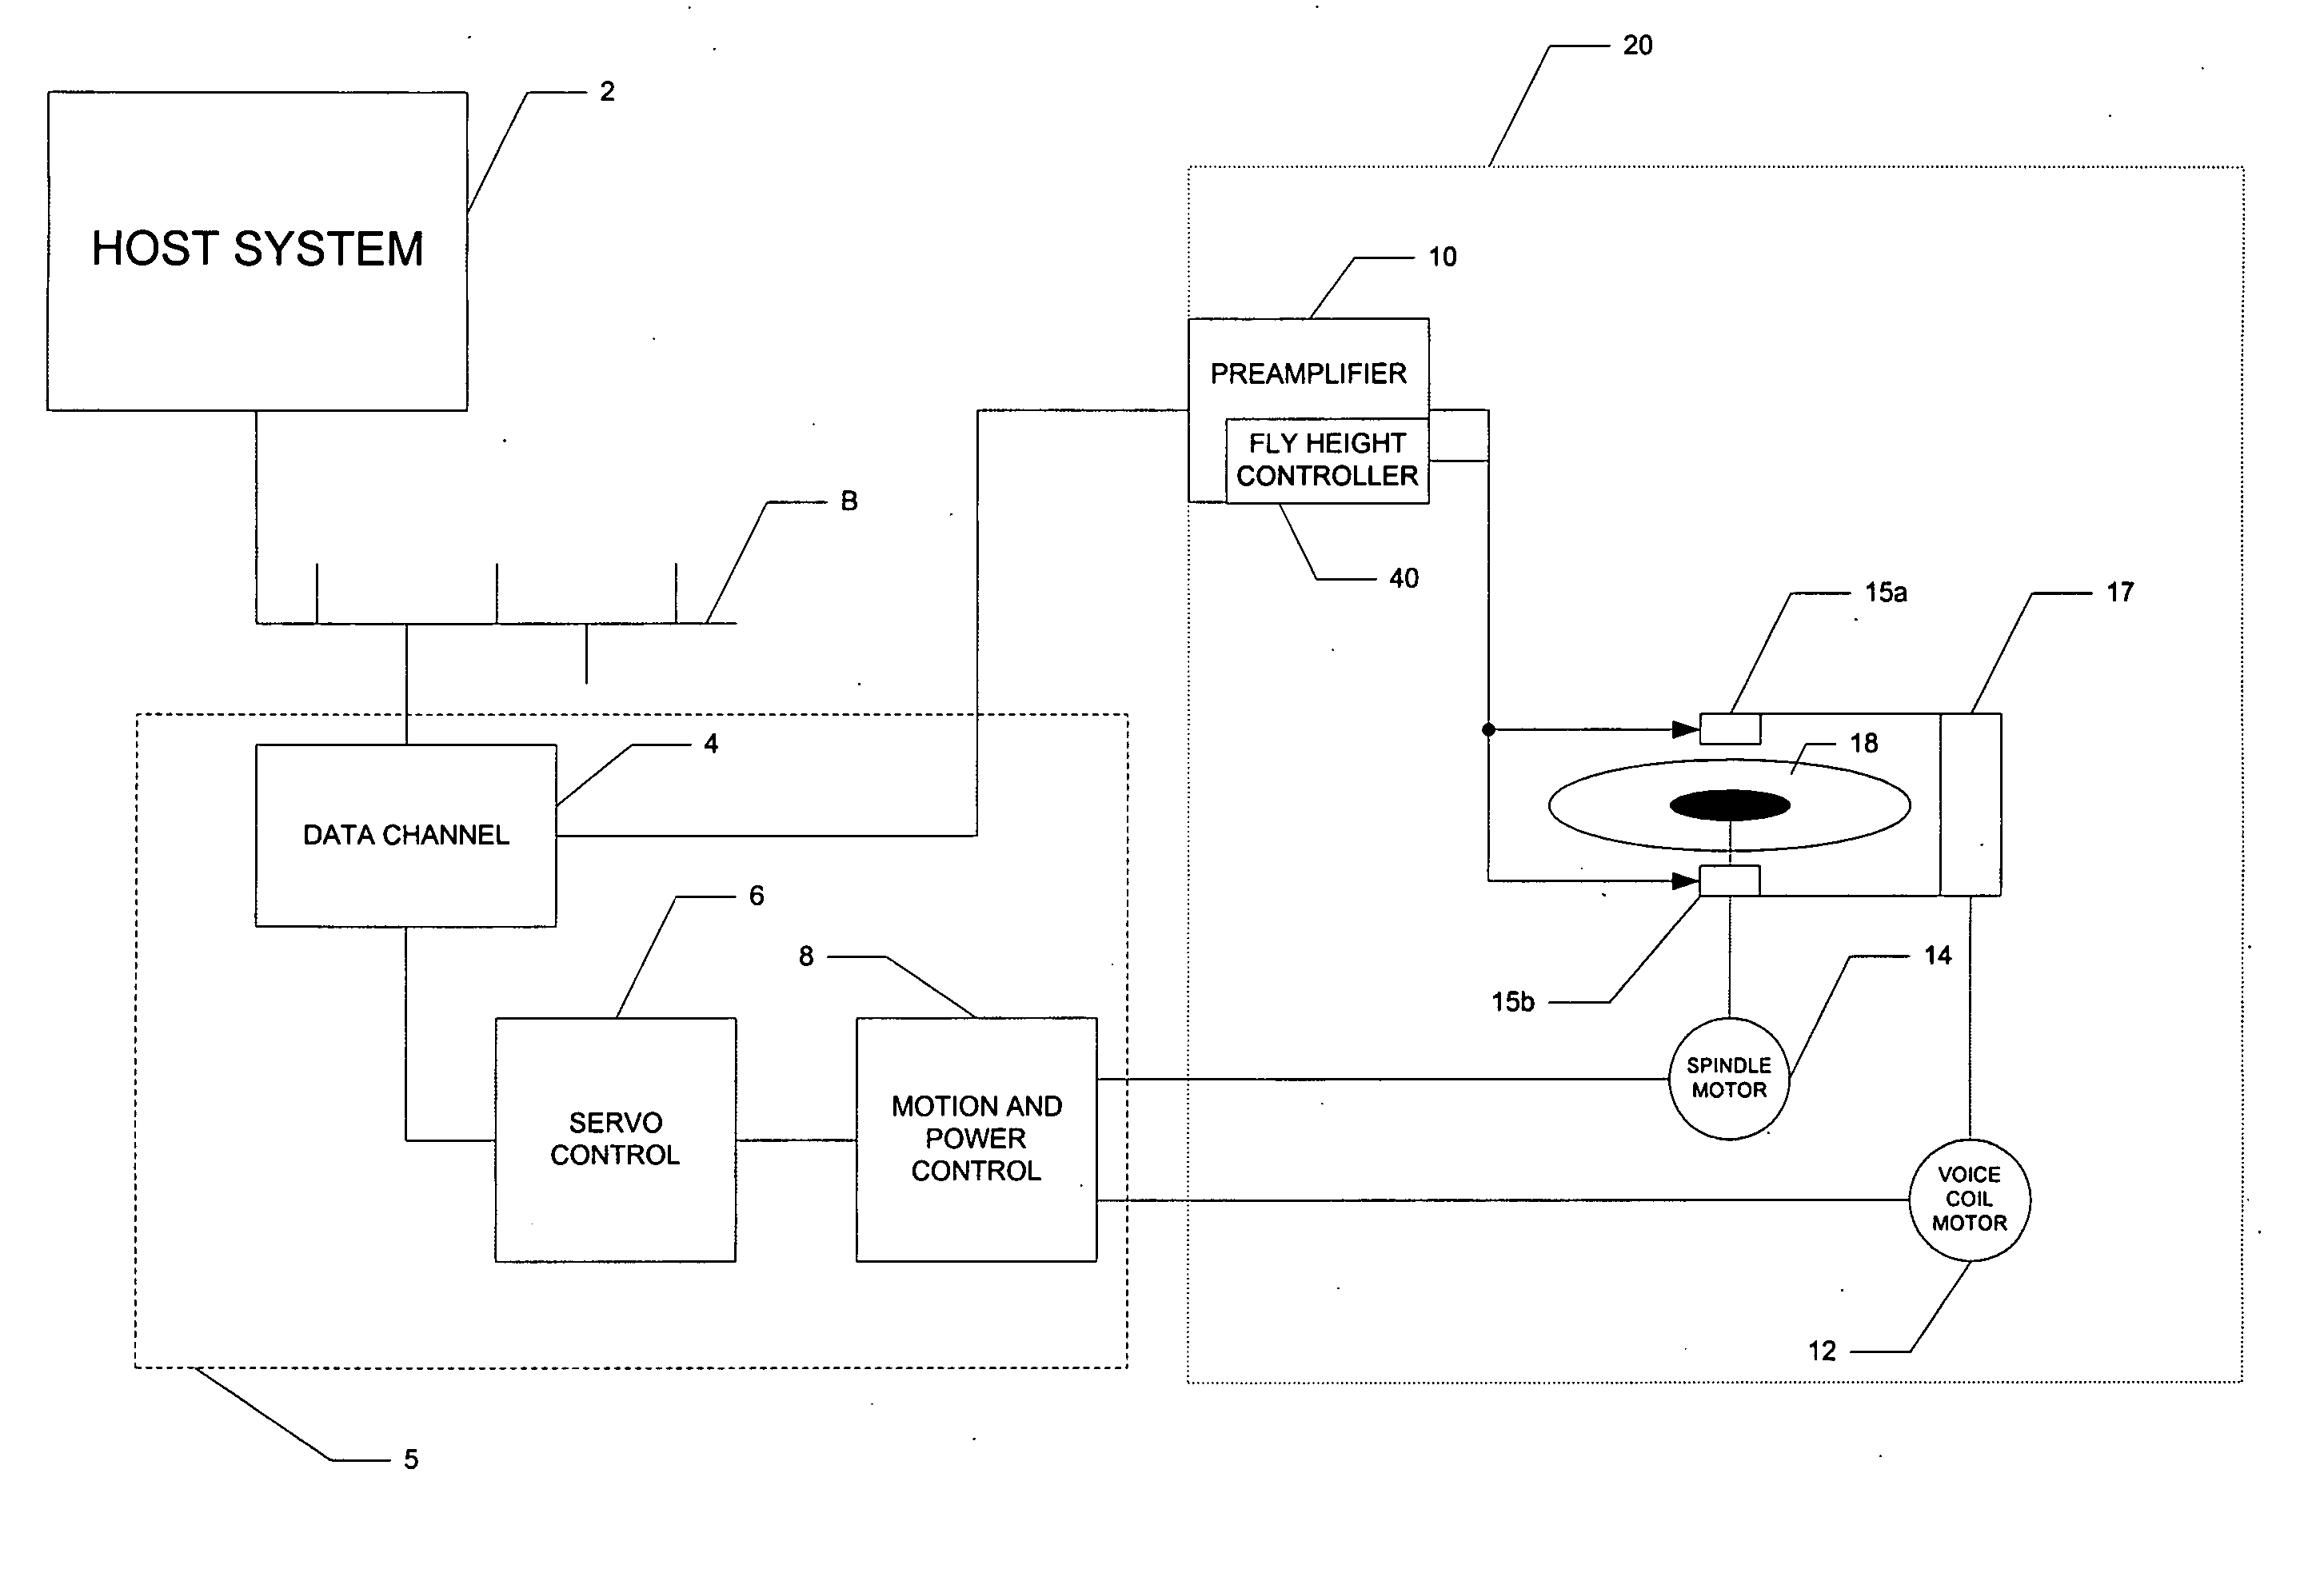 Disk drive fly height control based on constant power dissipation in read/write head heaters